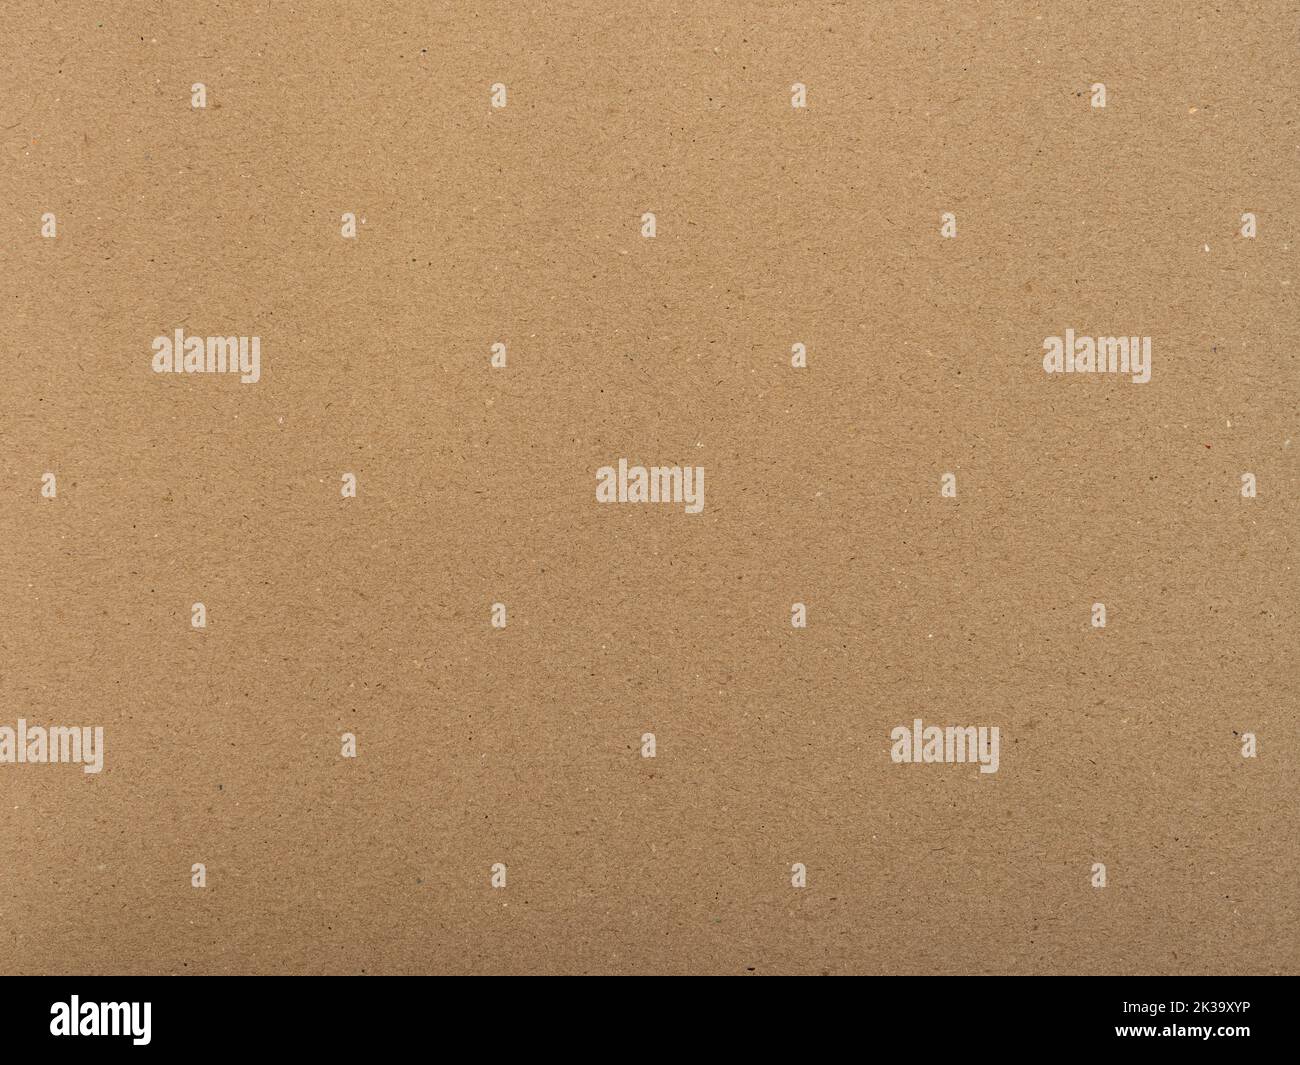 Brown paper texture. Textured background as a blank copy space. Cardboard structure with fine fiber details. Packaging material for a wrapping purpose Stock Photo